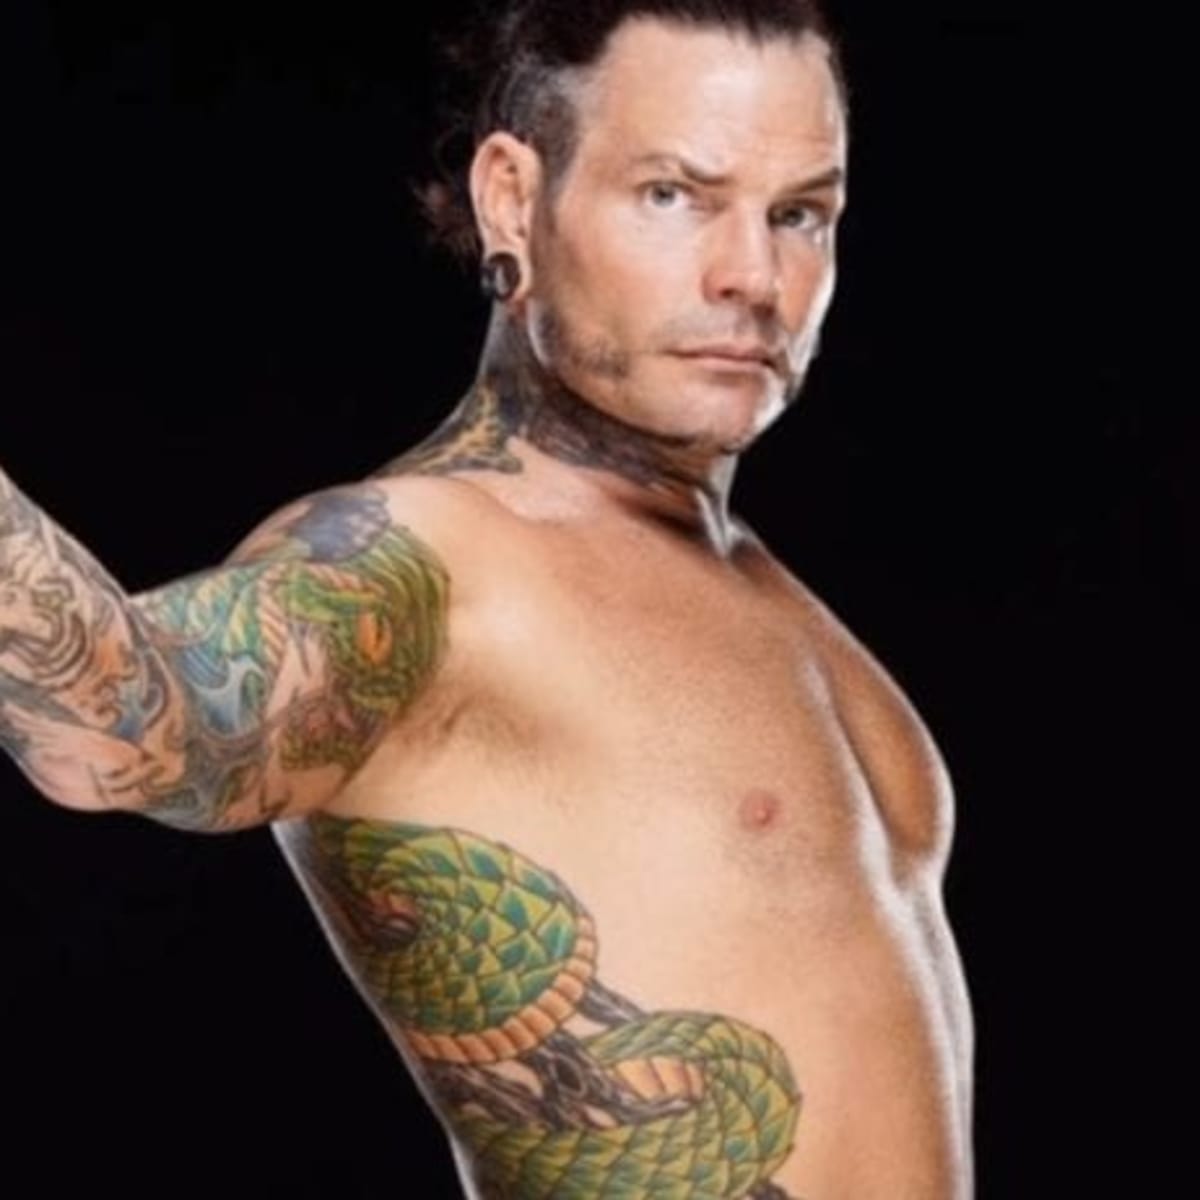 Jeff Hardy the outline of the Hardy Boyz symbol on the back of his neck and  upper back  I dont give a